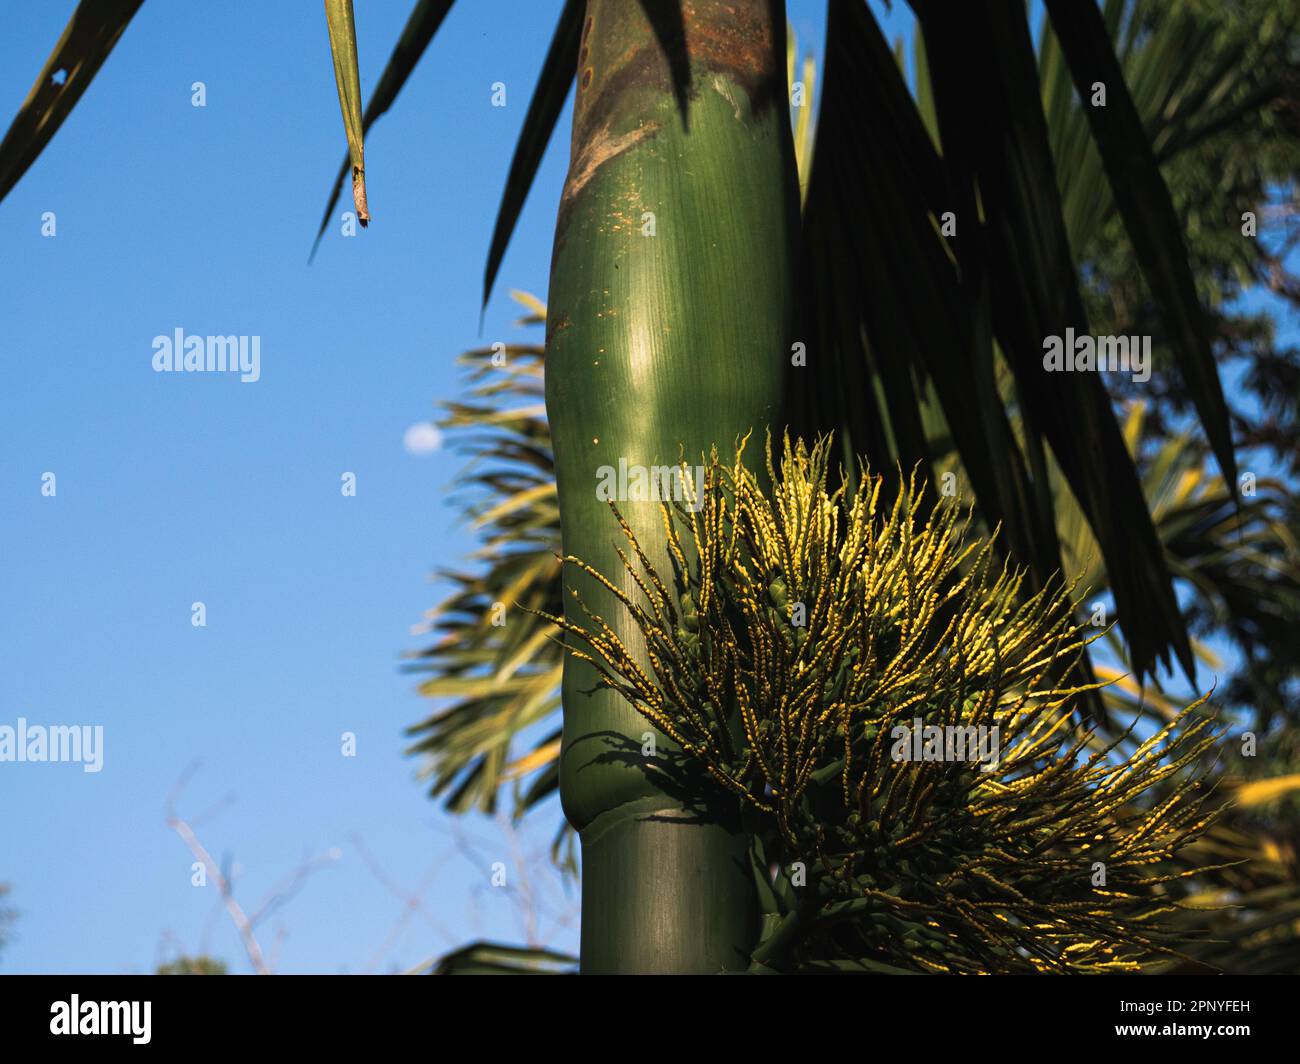 Low Angles Shot of Arecanut Plant Flowers During Golden Hour Sunlight Stock Photo